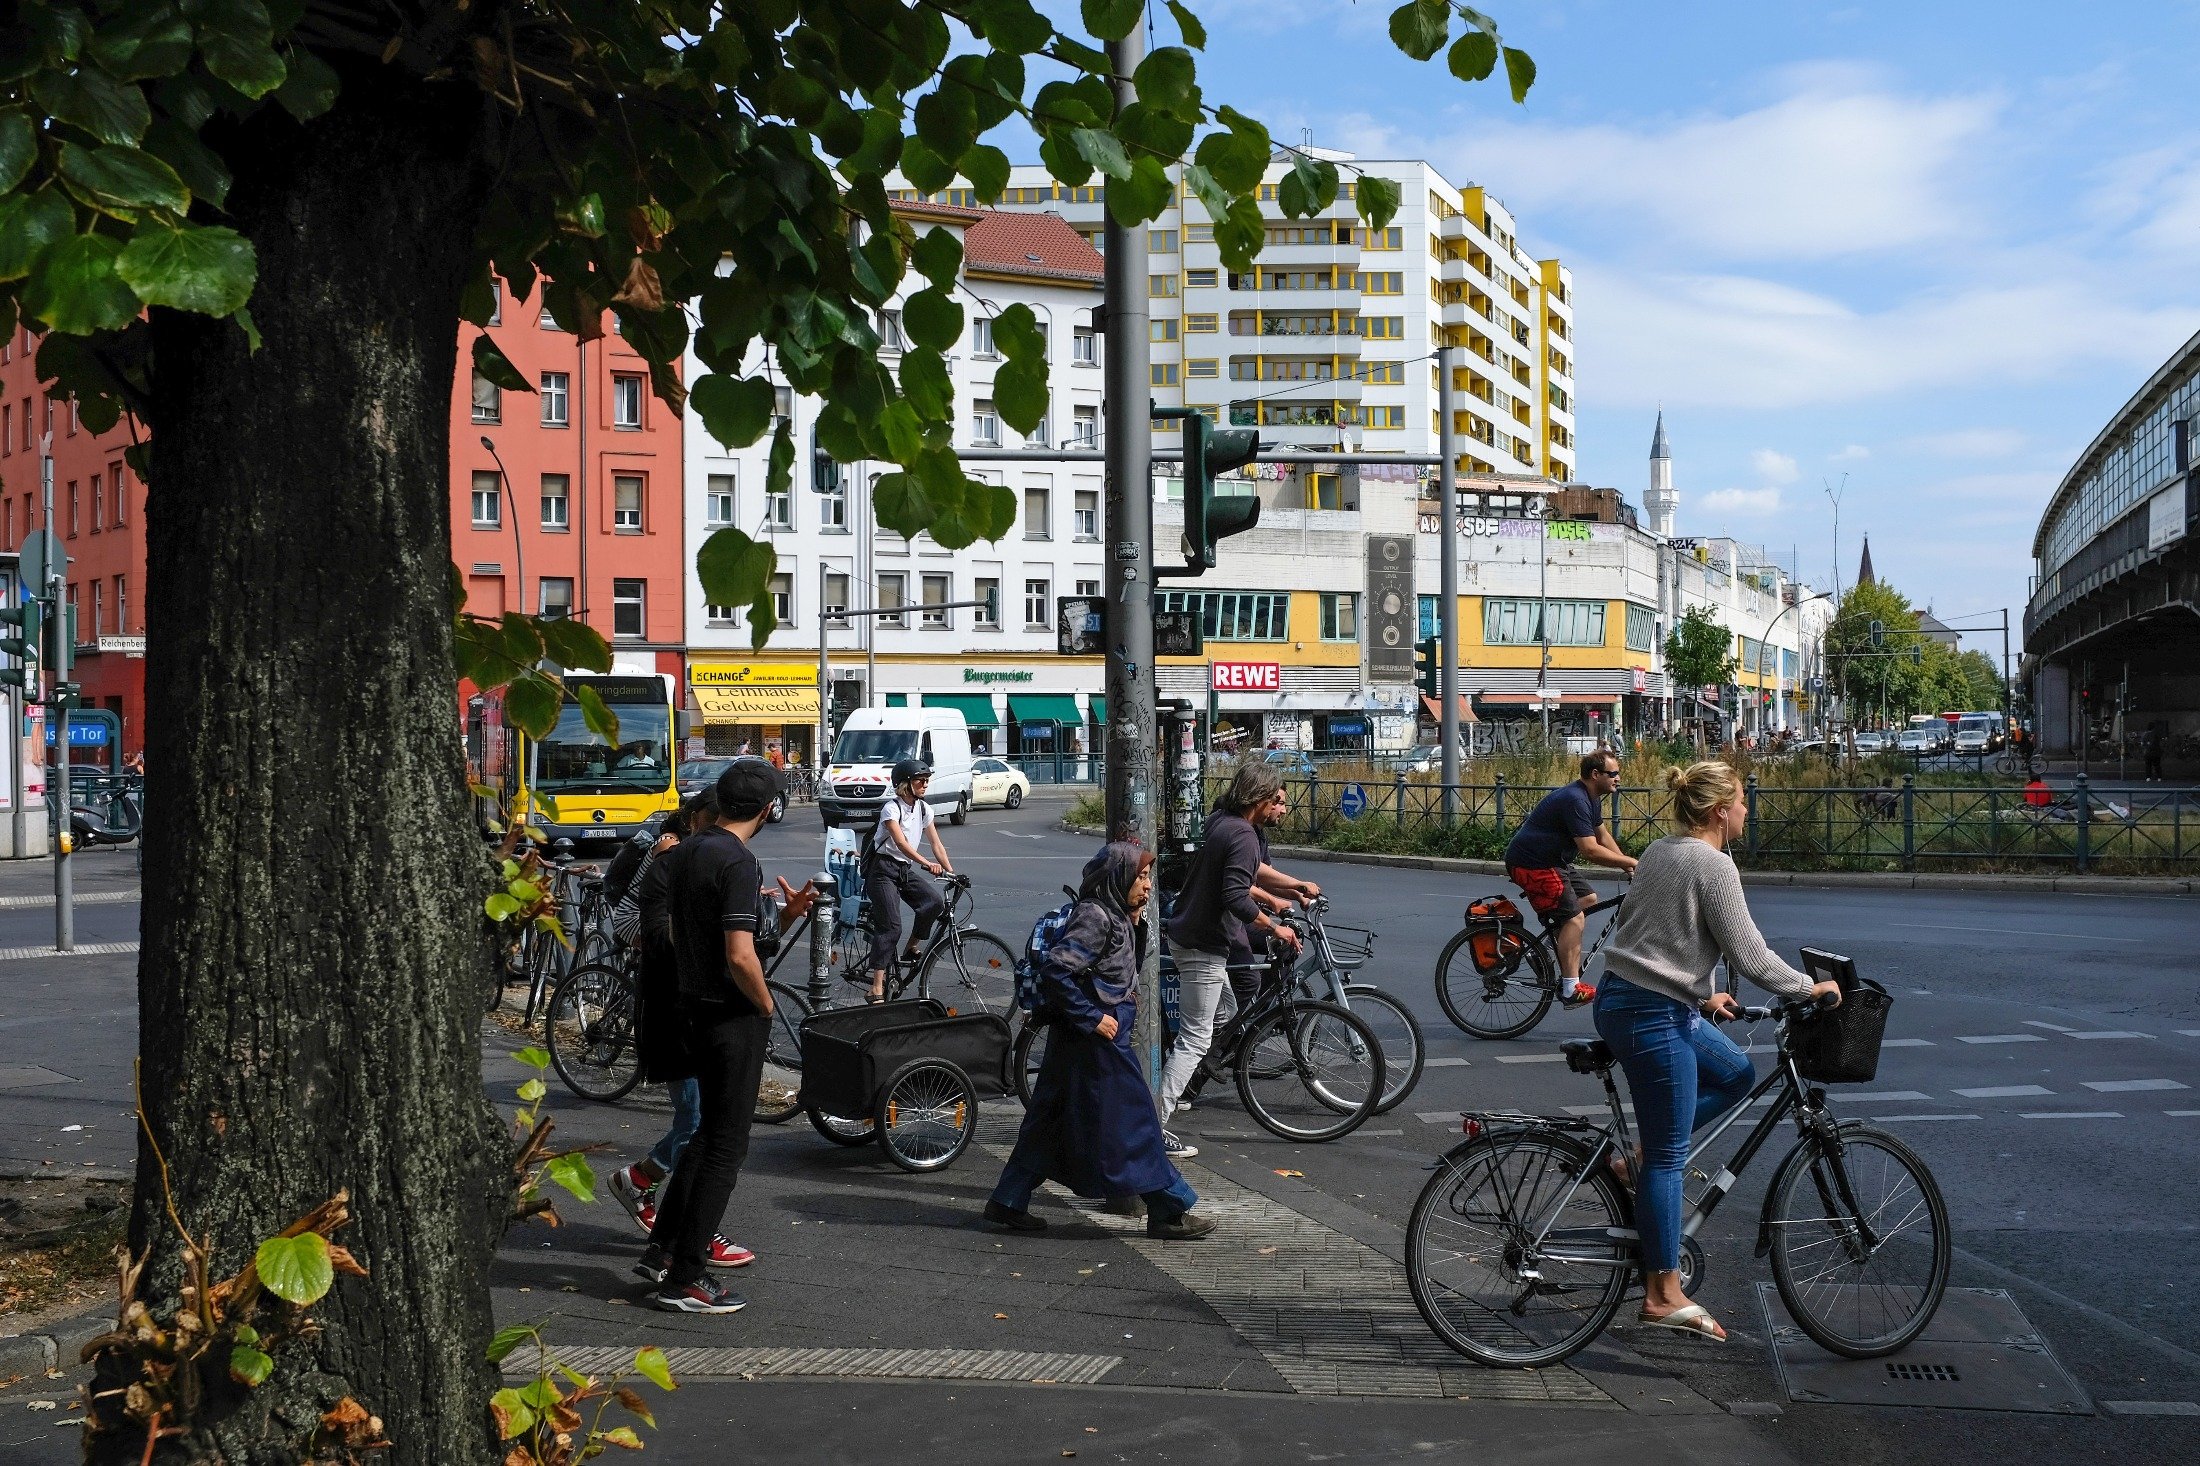 Pedestrians and bicyclists cross Skalitzer Strasse at Kottbuser Tor with a mosque